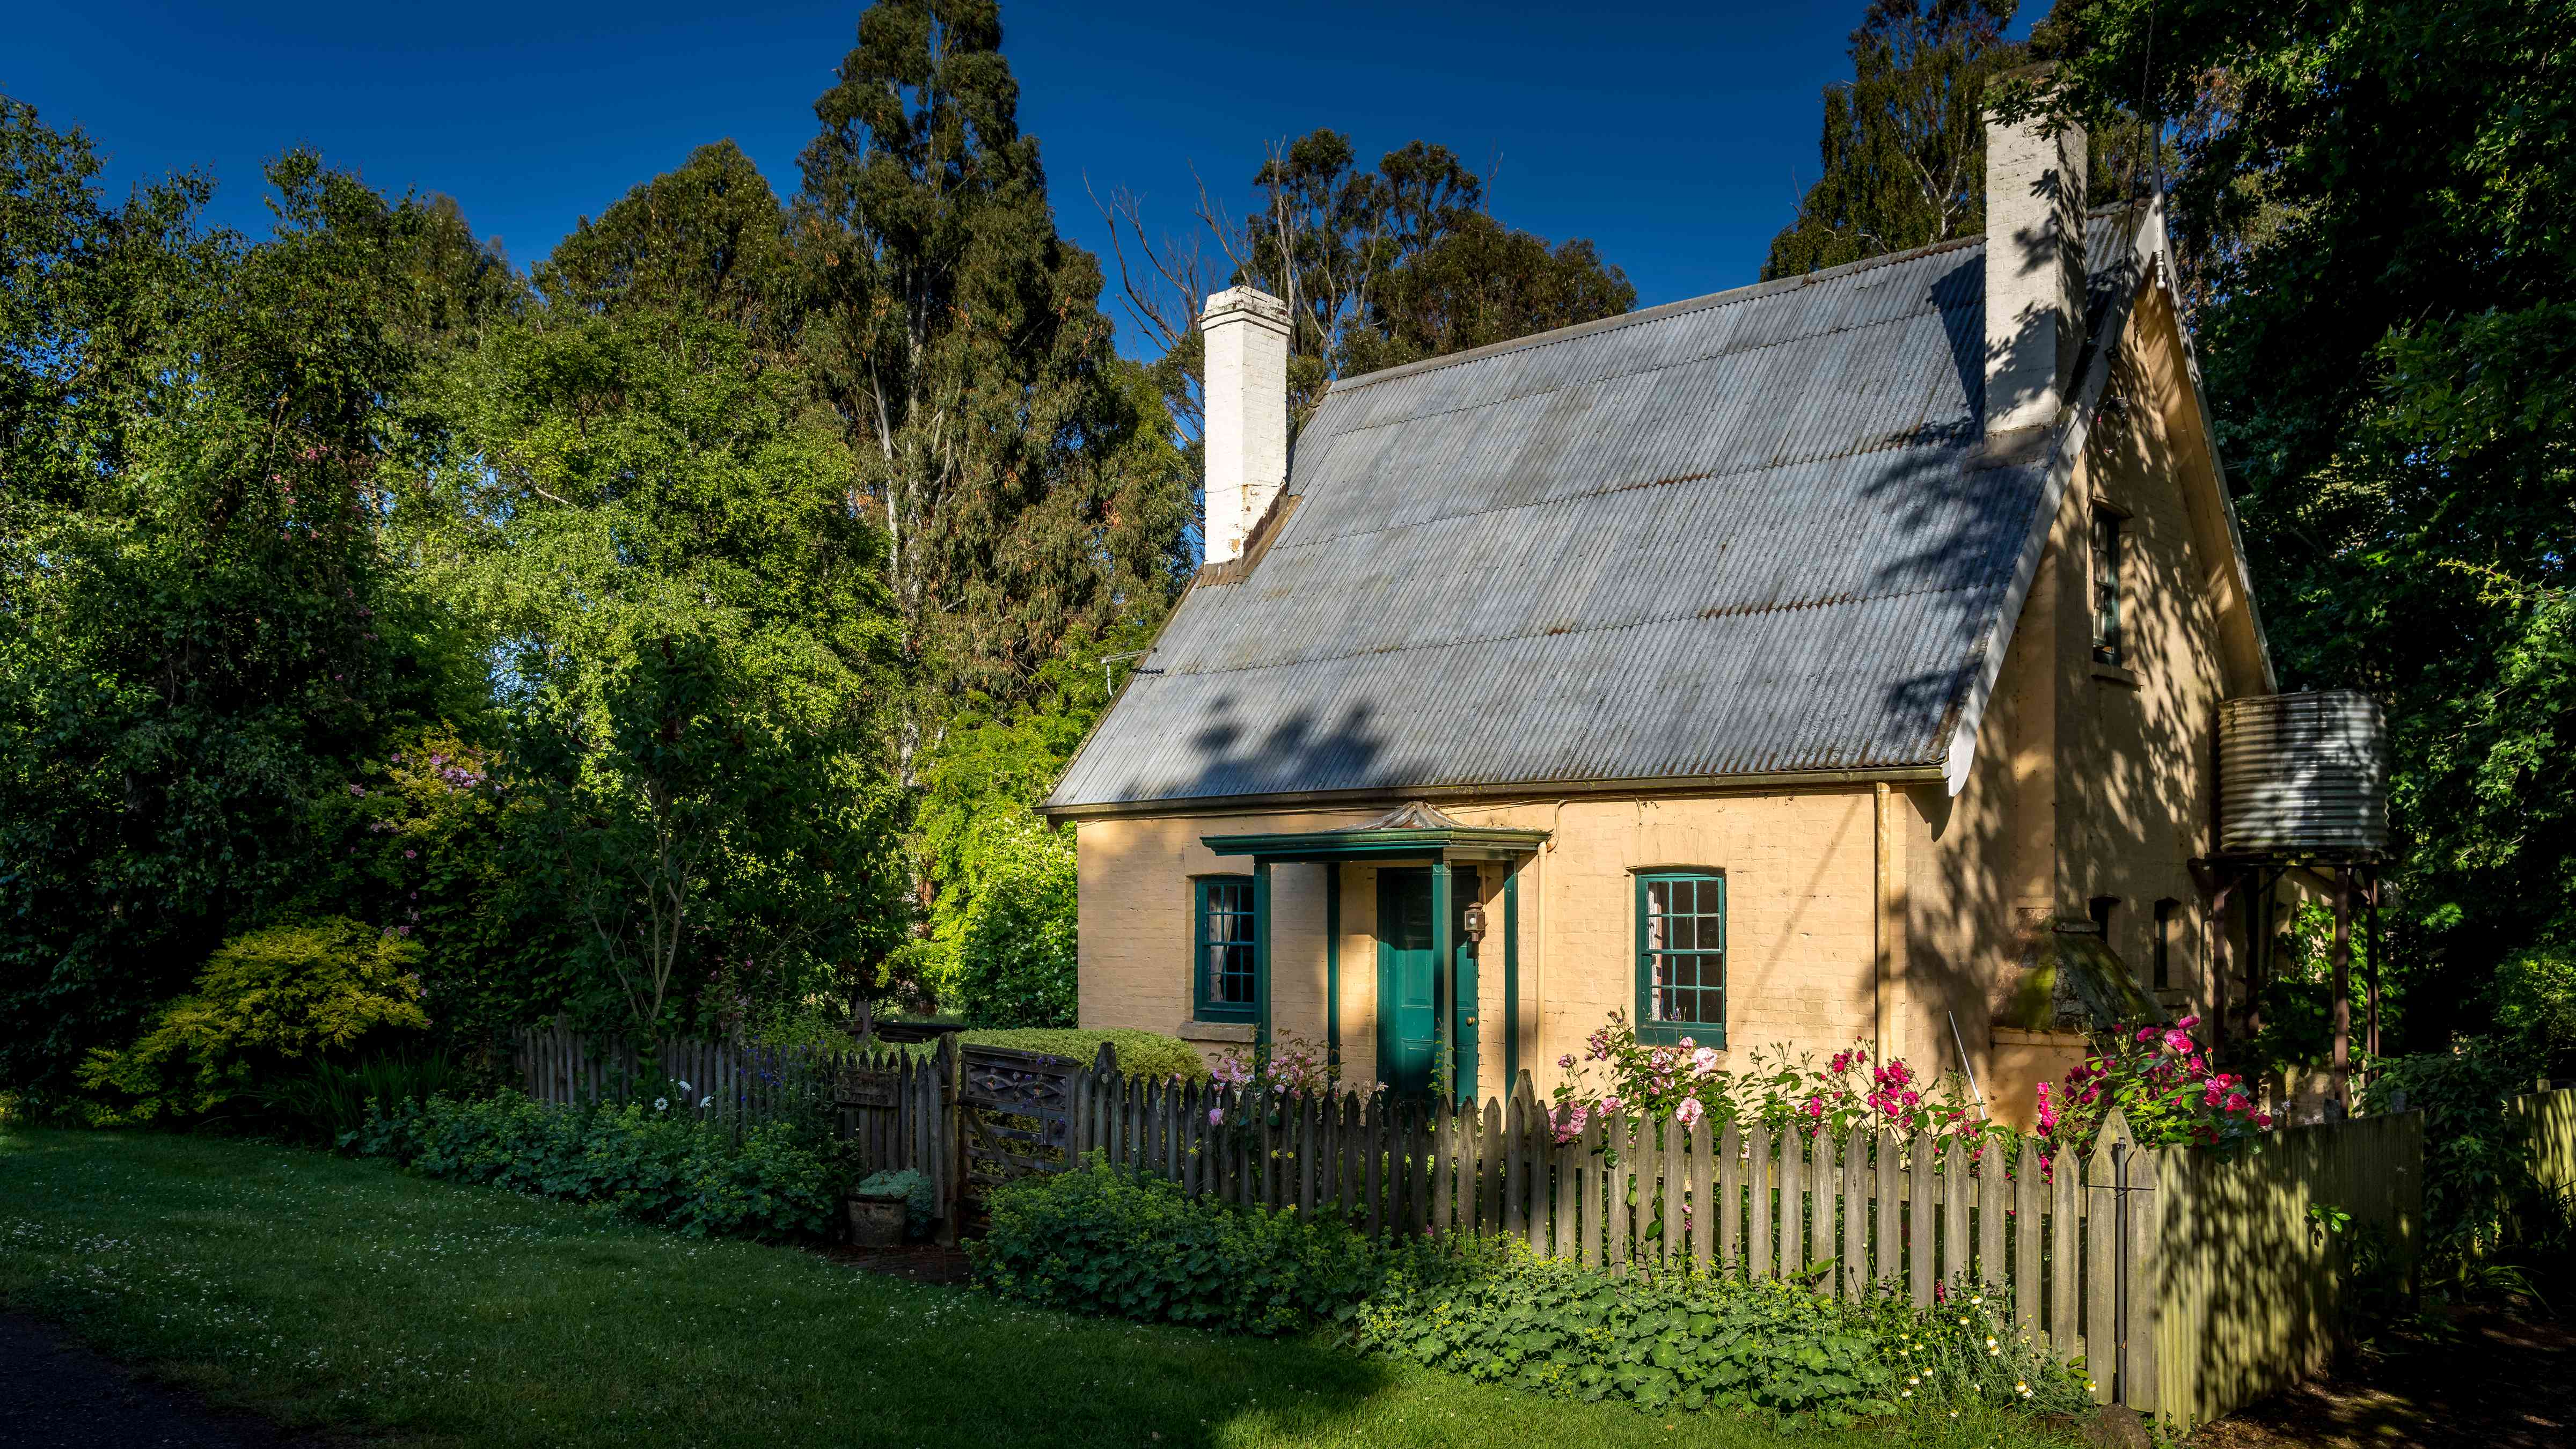 The cottage is surrounded by trees and a cottage style garden with pink roses. A timber picket fence runs along the front garden with alchamila plants and a lawn in the foreground. The steep pitched corrugated iron roof has two chimneys on either side of the house. The front of the cottage has two paned windows painted green with a green front door in the middle and a small porch over. The walls are limewashed brick and a tank stand is on the right of the cottage. Photo: Rob Burnett.